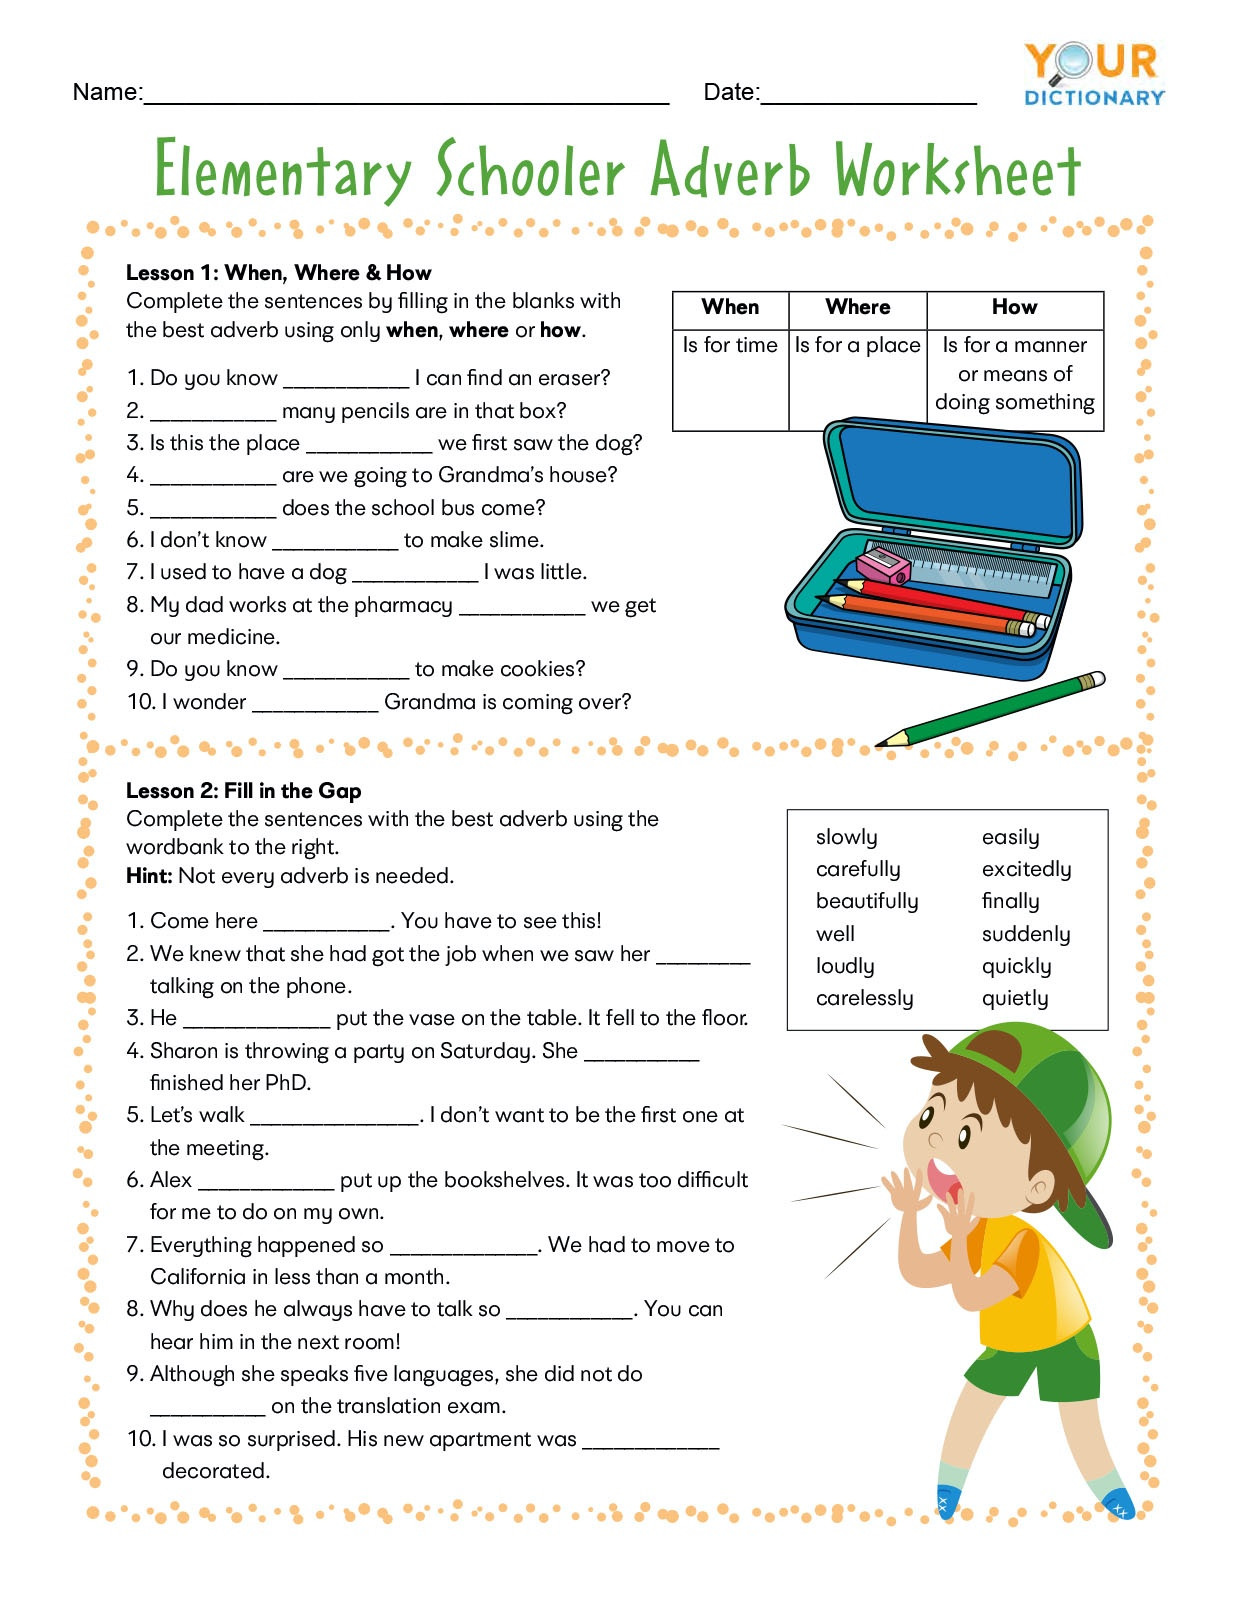 4th Grade Adverb Worksheets Adverb Worksheets for Elementary and Middle School